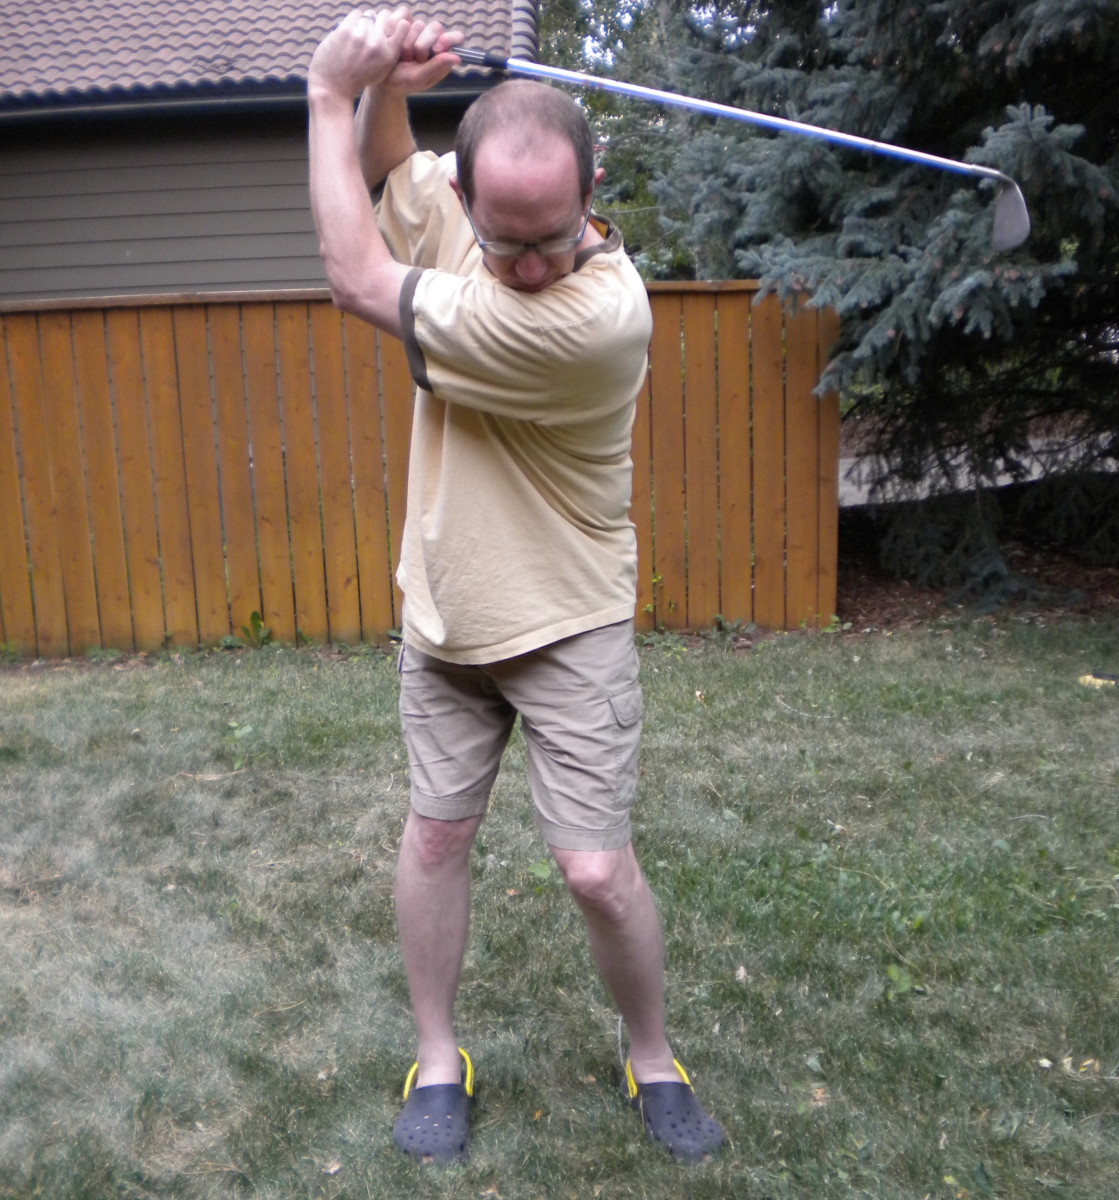 Typical overswing. Notice the bent left arm. The longer the swing, the more things break down leading to bad shots.